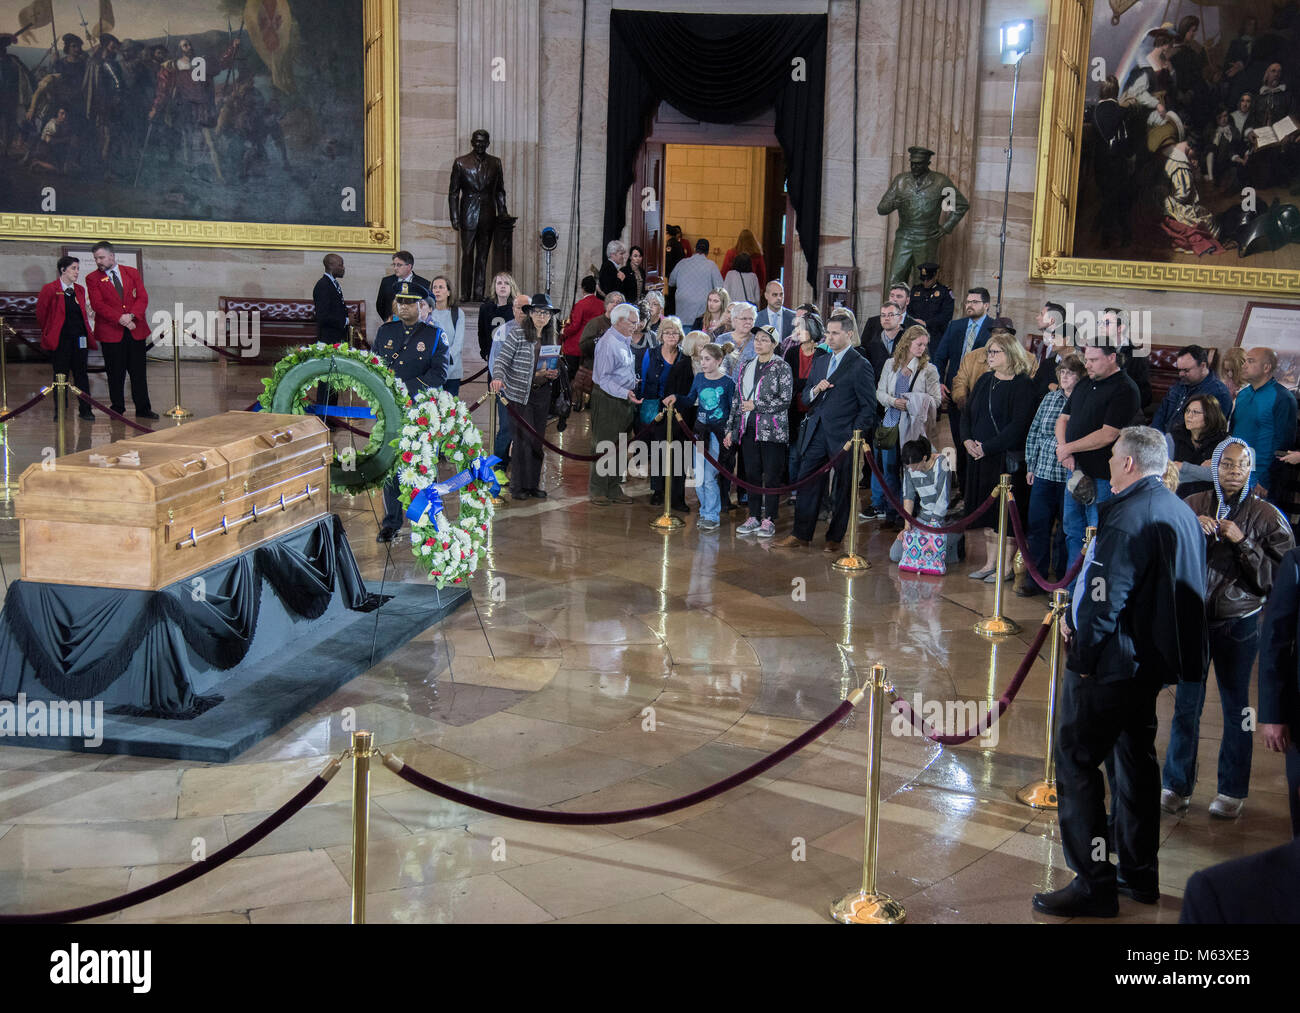 Washington, DC February 28, 2018, USA: An elevated view at the US Capitol Rotunda shows the public paying tribute as the body of Rev Billy Graham 'Lays in Honor' in the Rotunda of the US Capitol. One woman is overcome with grief while viewing the coffin, Patsy Lynch/MediaPunch Stock Photo